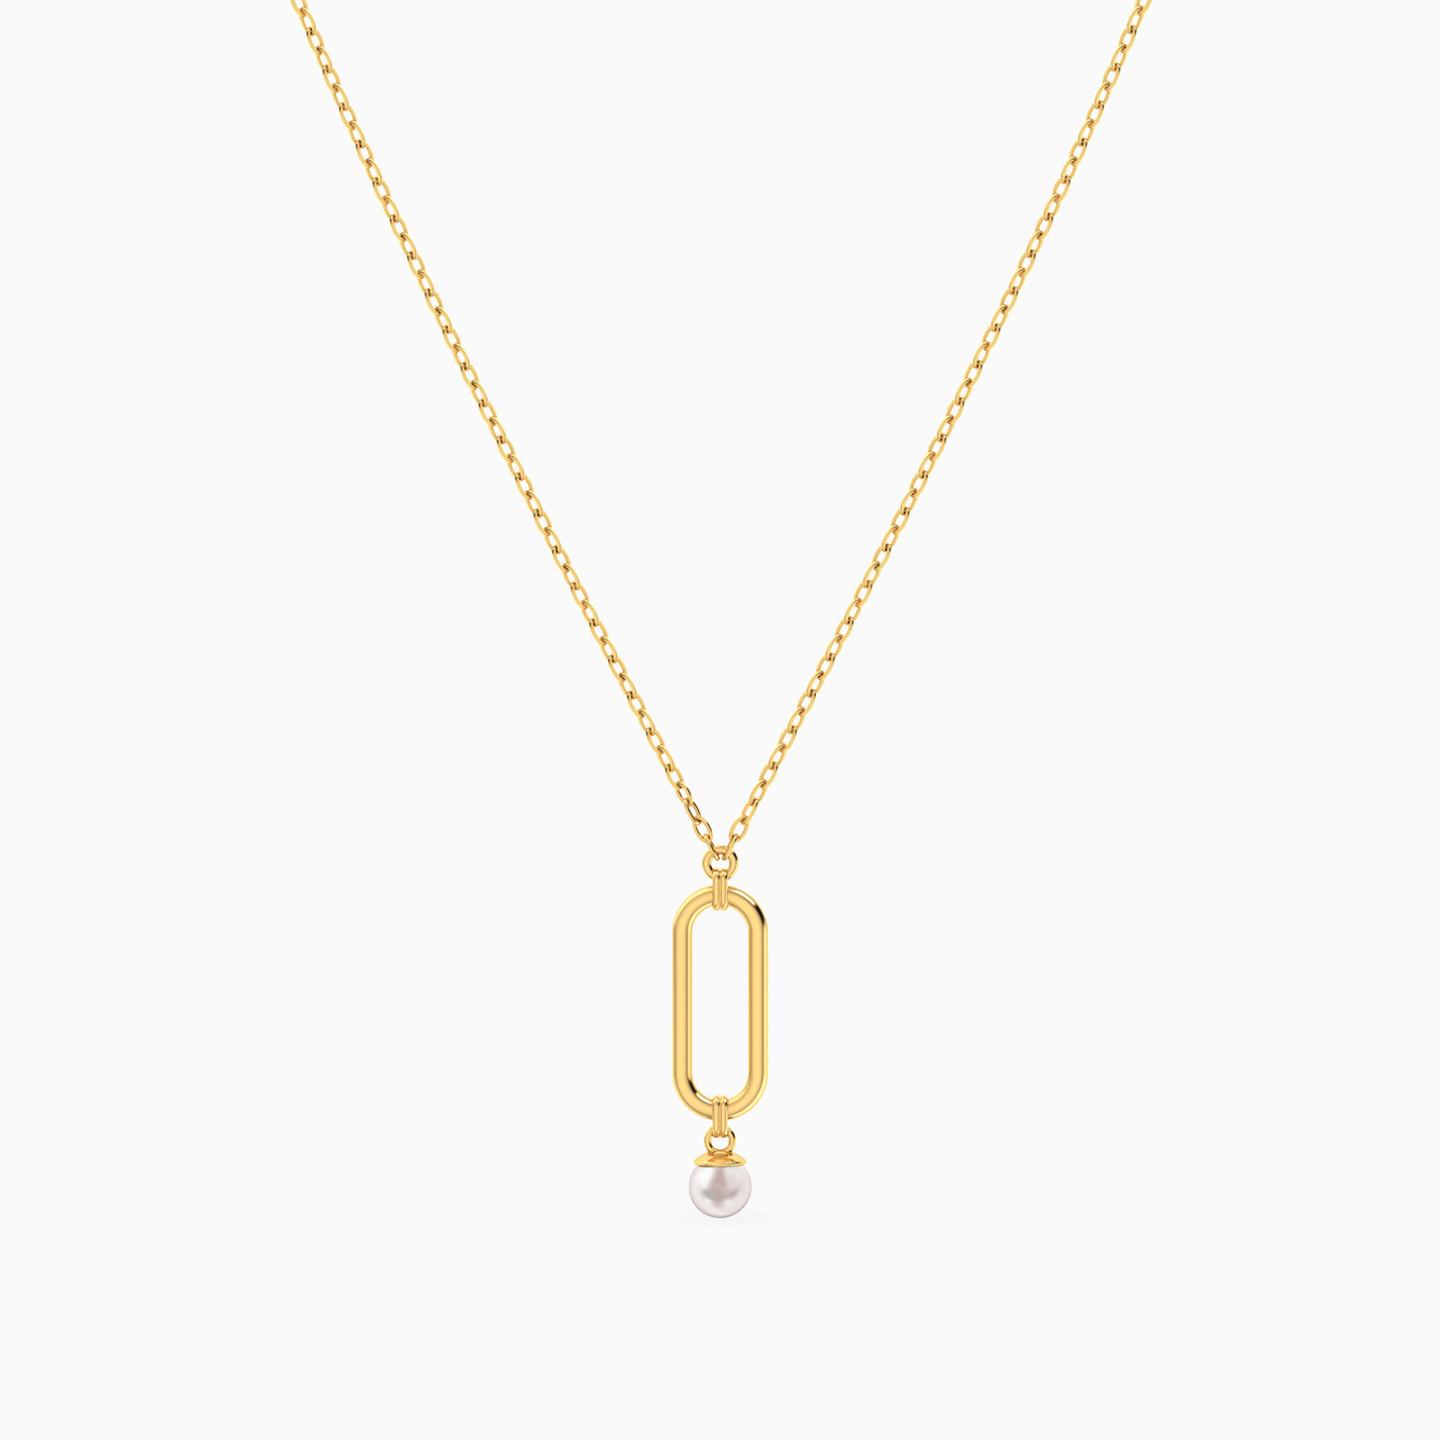 14K Gold Pearl Pendant Necklace - 4